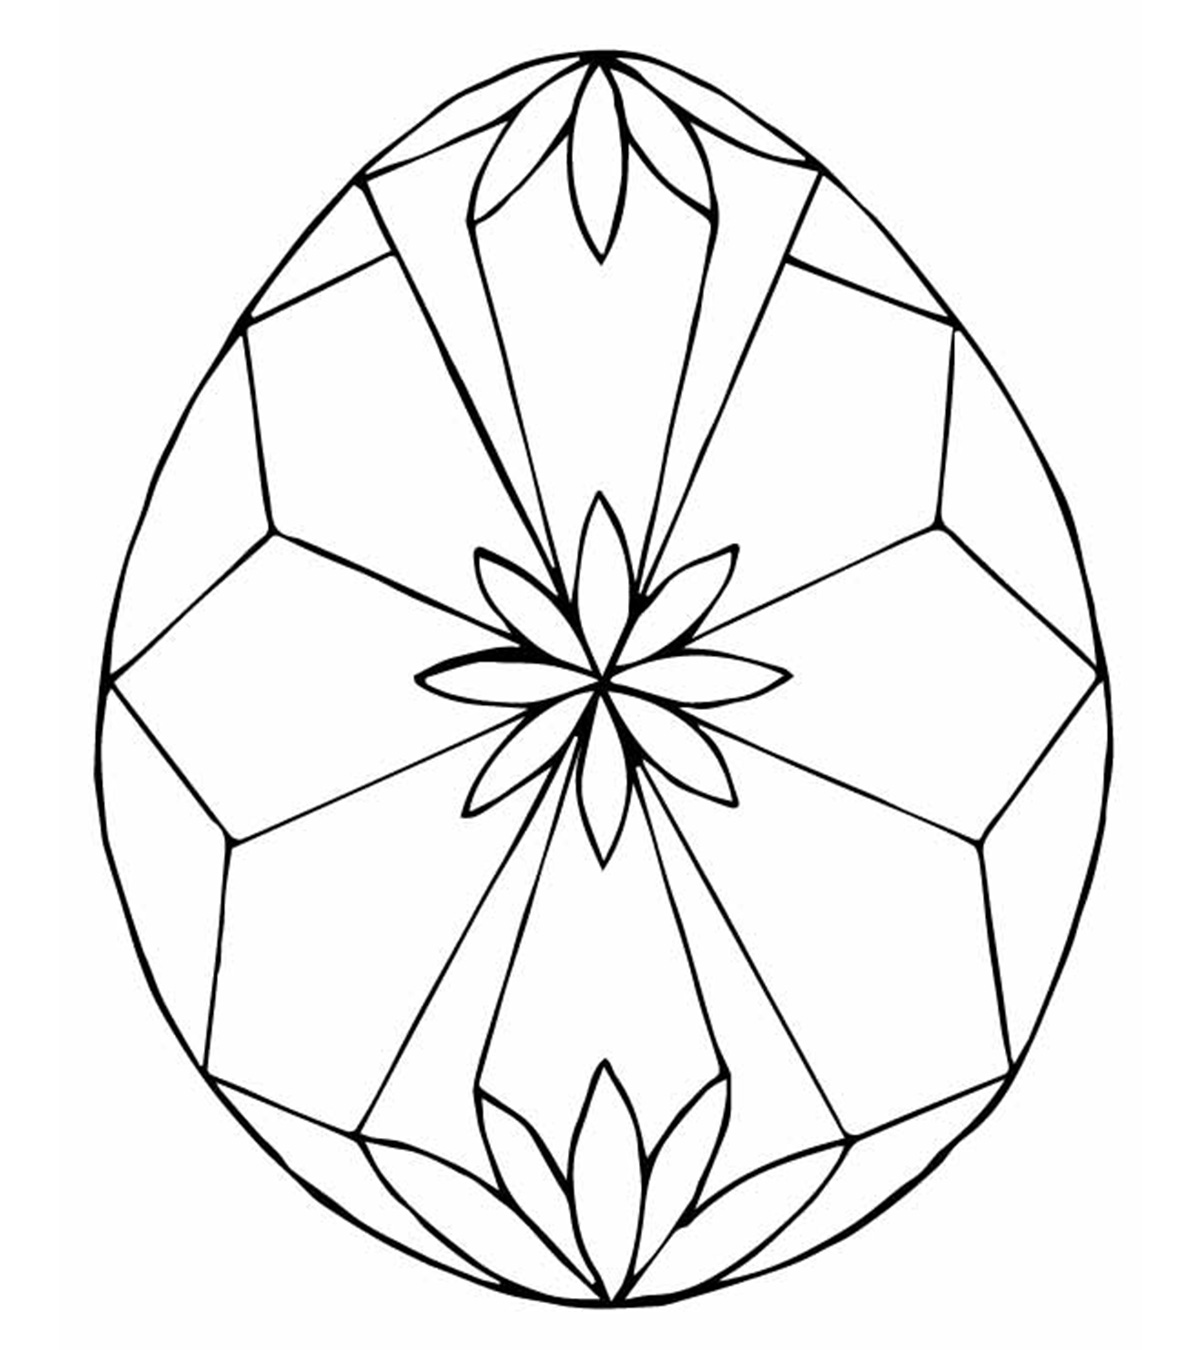 Top 10 Diamond Coloring Pages Your Toddler Will To Color_image